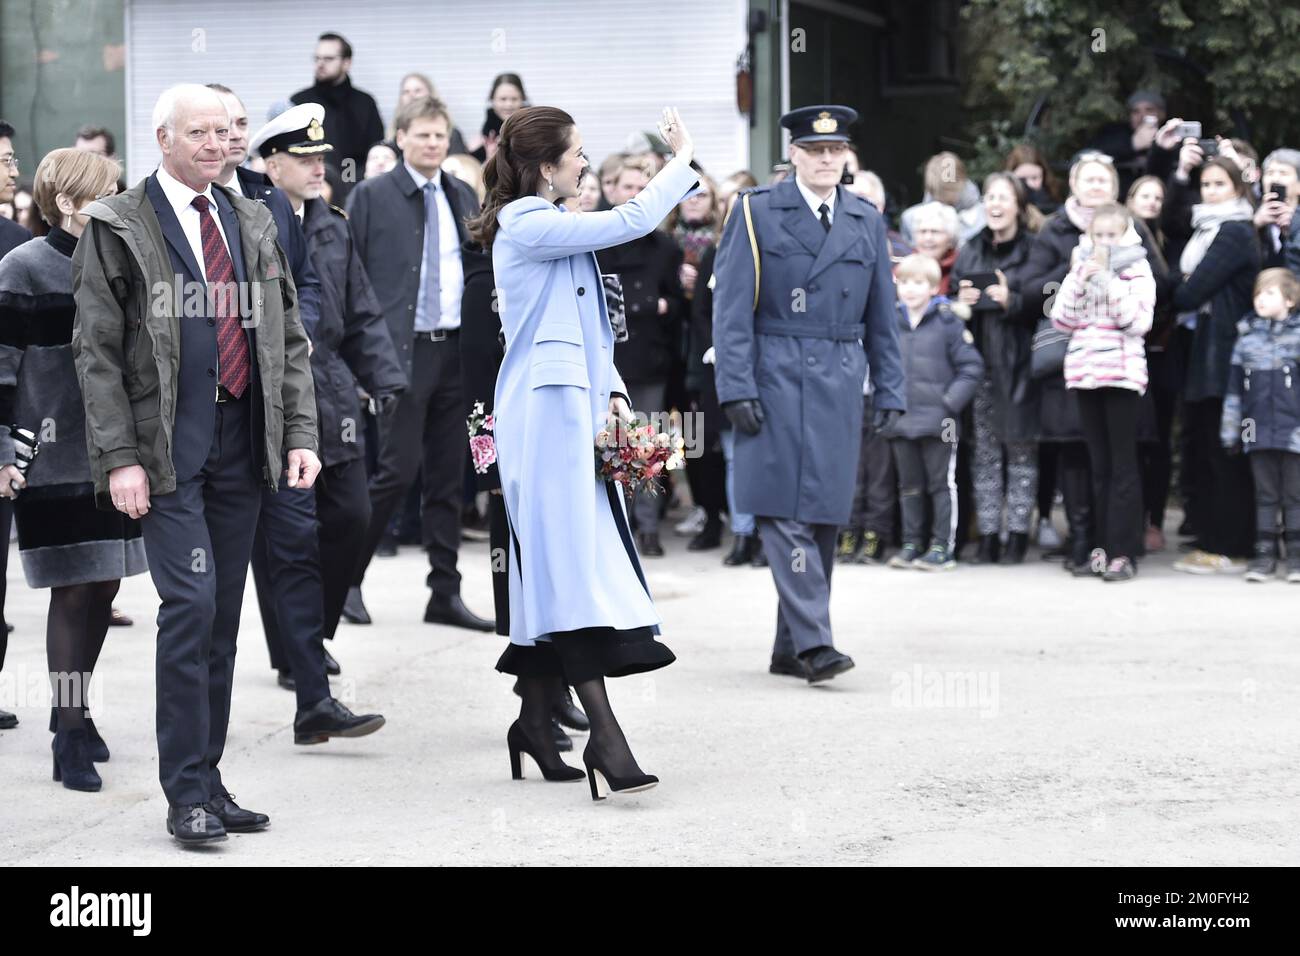 On April 10th 2019 Her Majesty Queen Margrethe and HRH Crown Princess Mary performed the official opening of the new Copenhagen Zoo panda enclosure. This marks the launch of the research project Sino-Denmark Giant Panda Joint Research Project Cooperation a breeding and research program. The panda enclosure will be open to the public from April 11th. Stock Photo